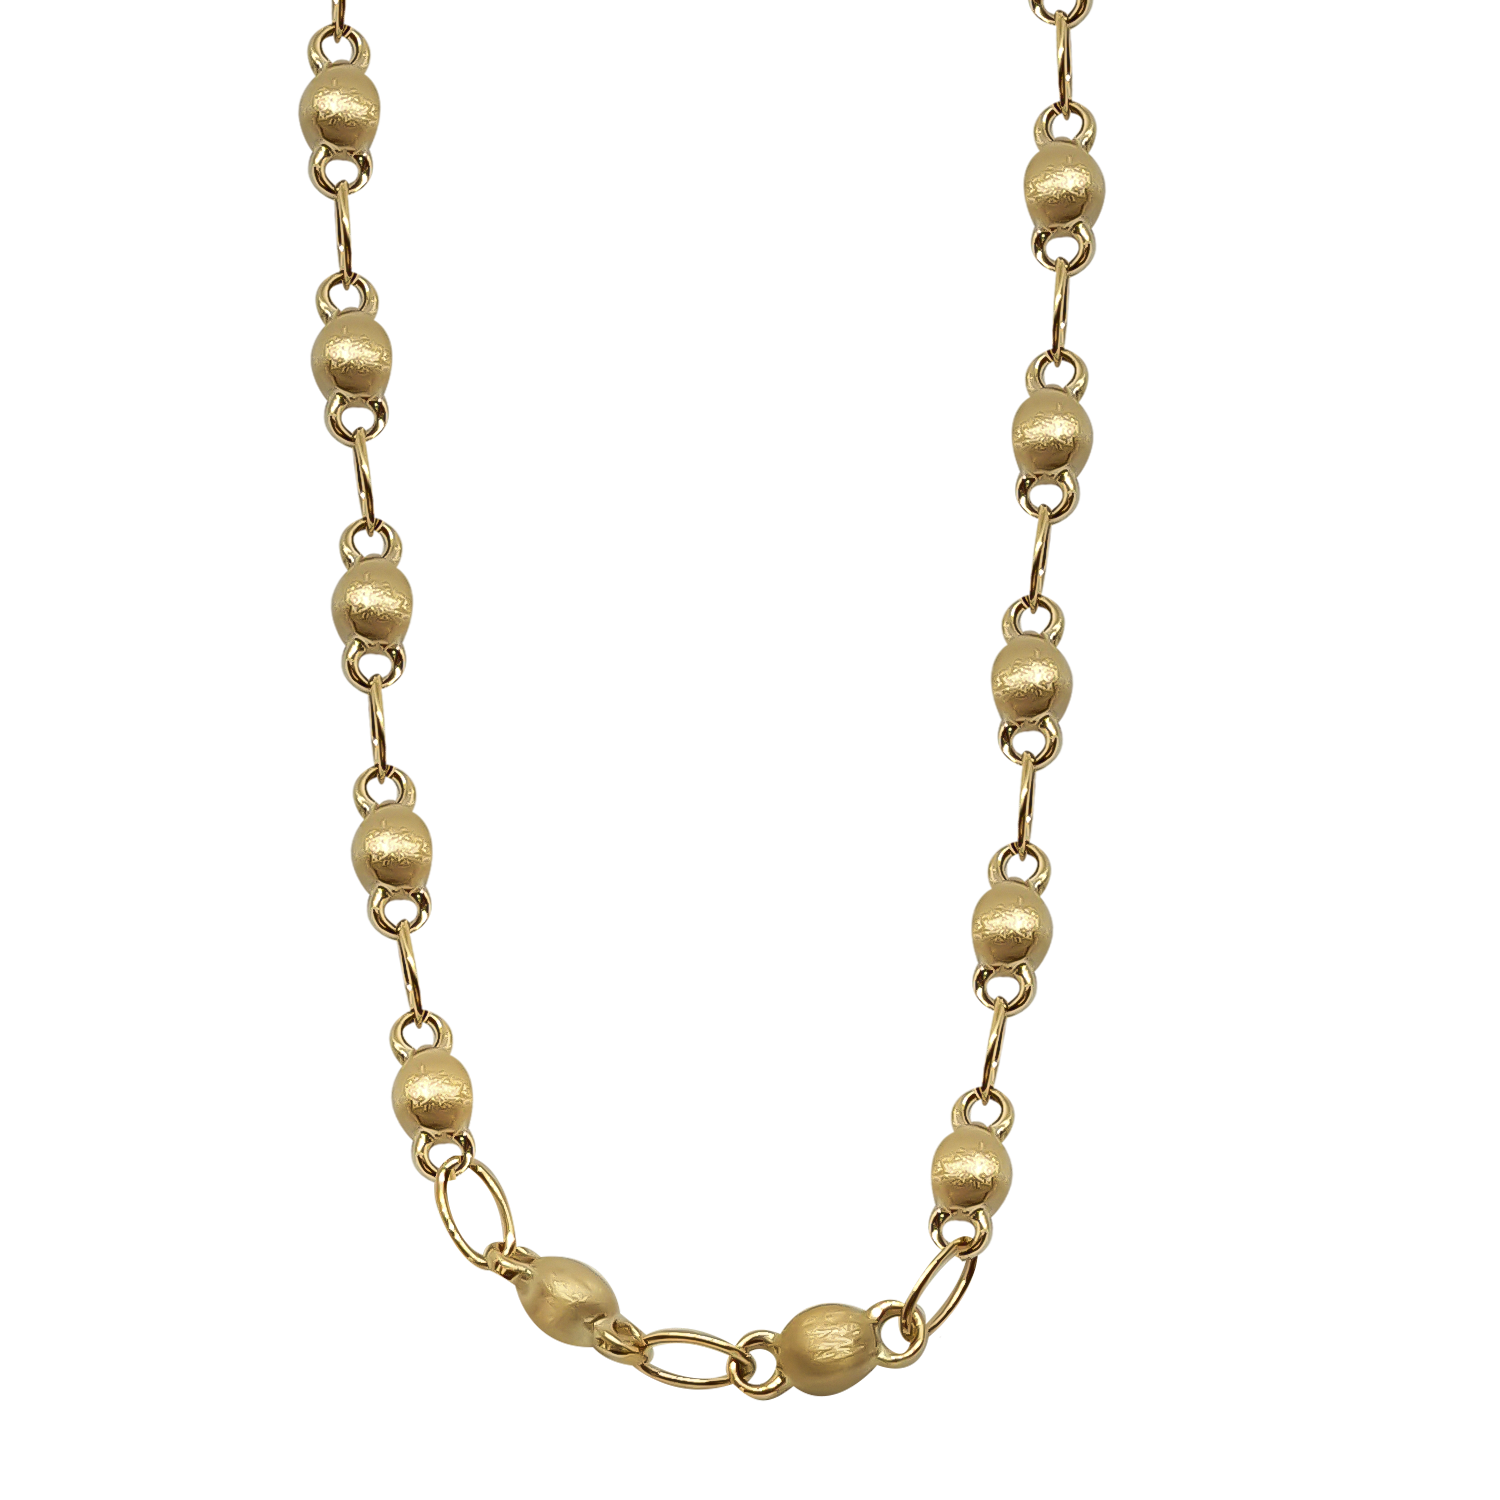 Oval Matt Link Chain in 9ct Yellow Gold in hollow tubes for a lighter weight on your shoulders.